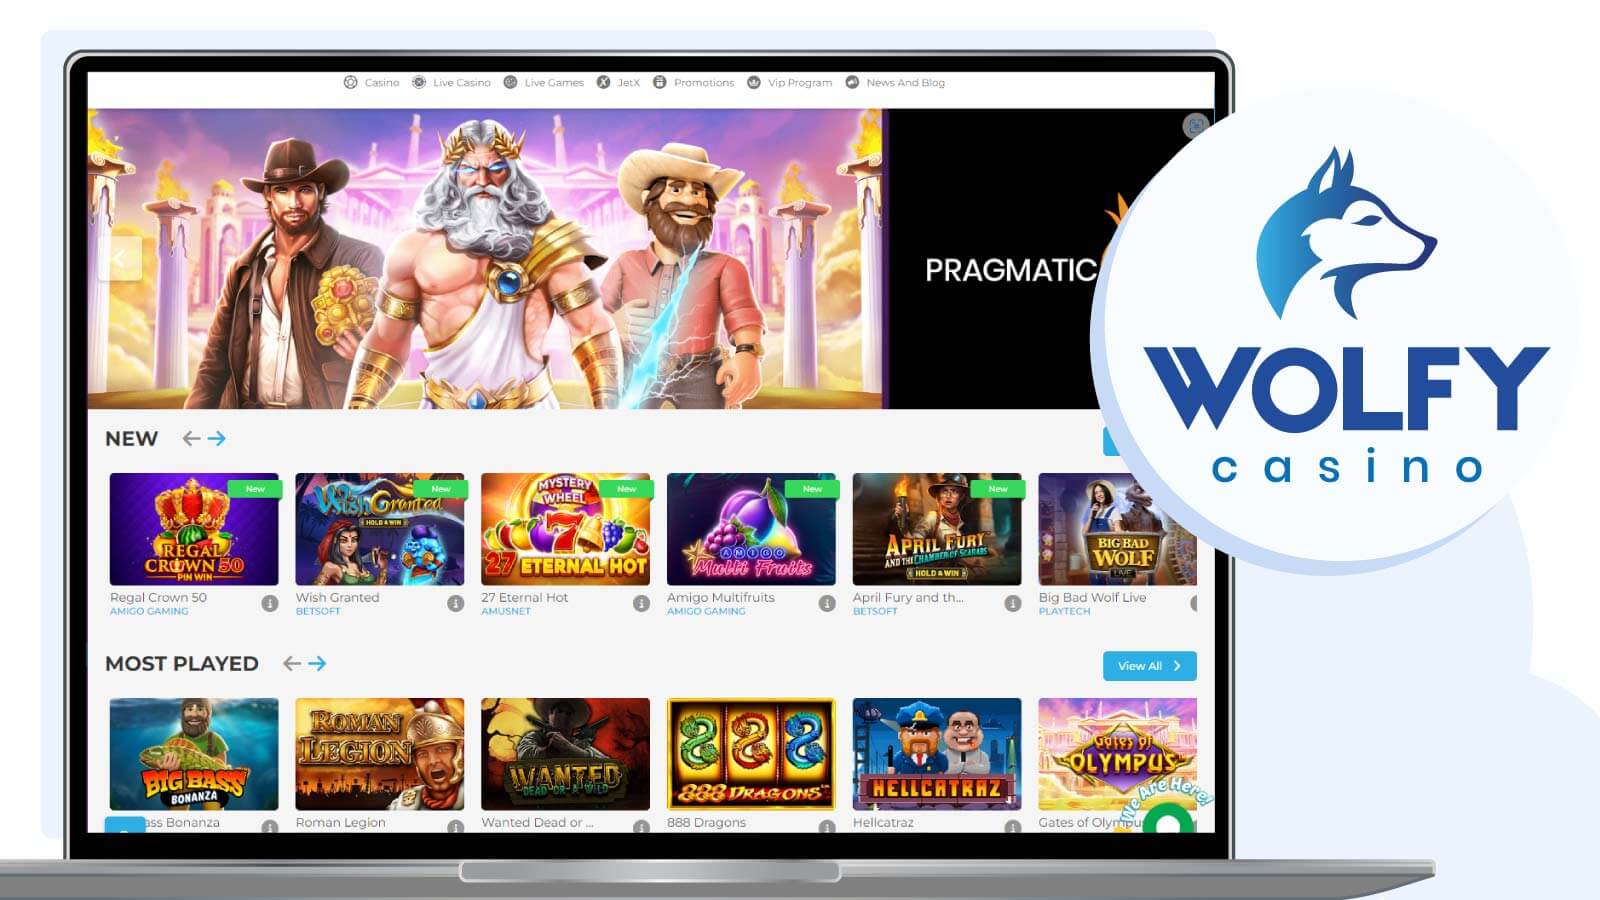 Wolfy Casino - Our $20 Deposit NZ Casino Recommendation